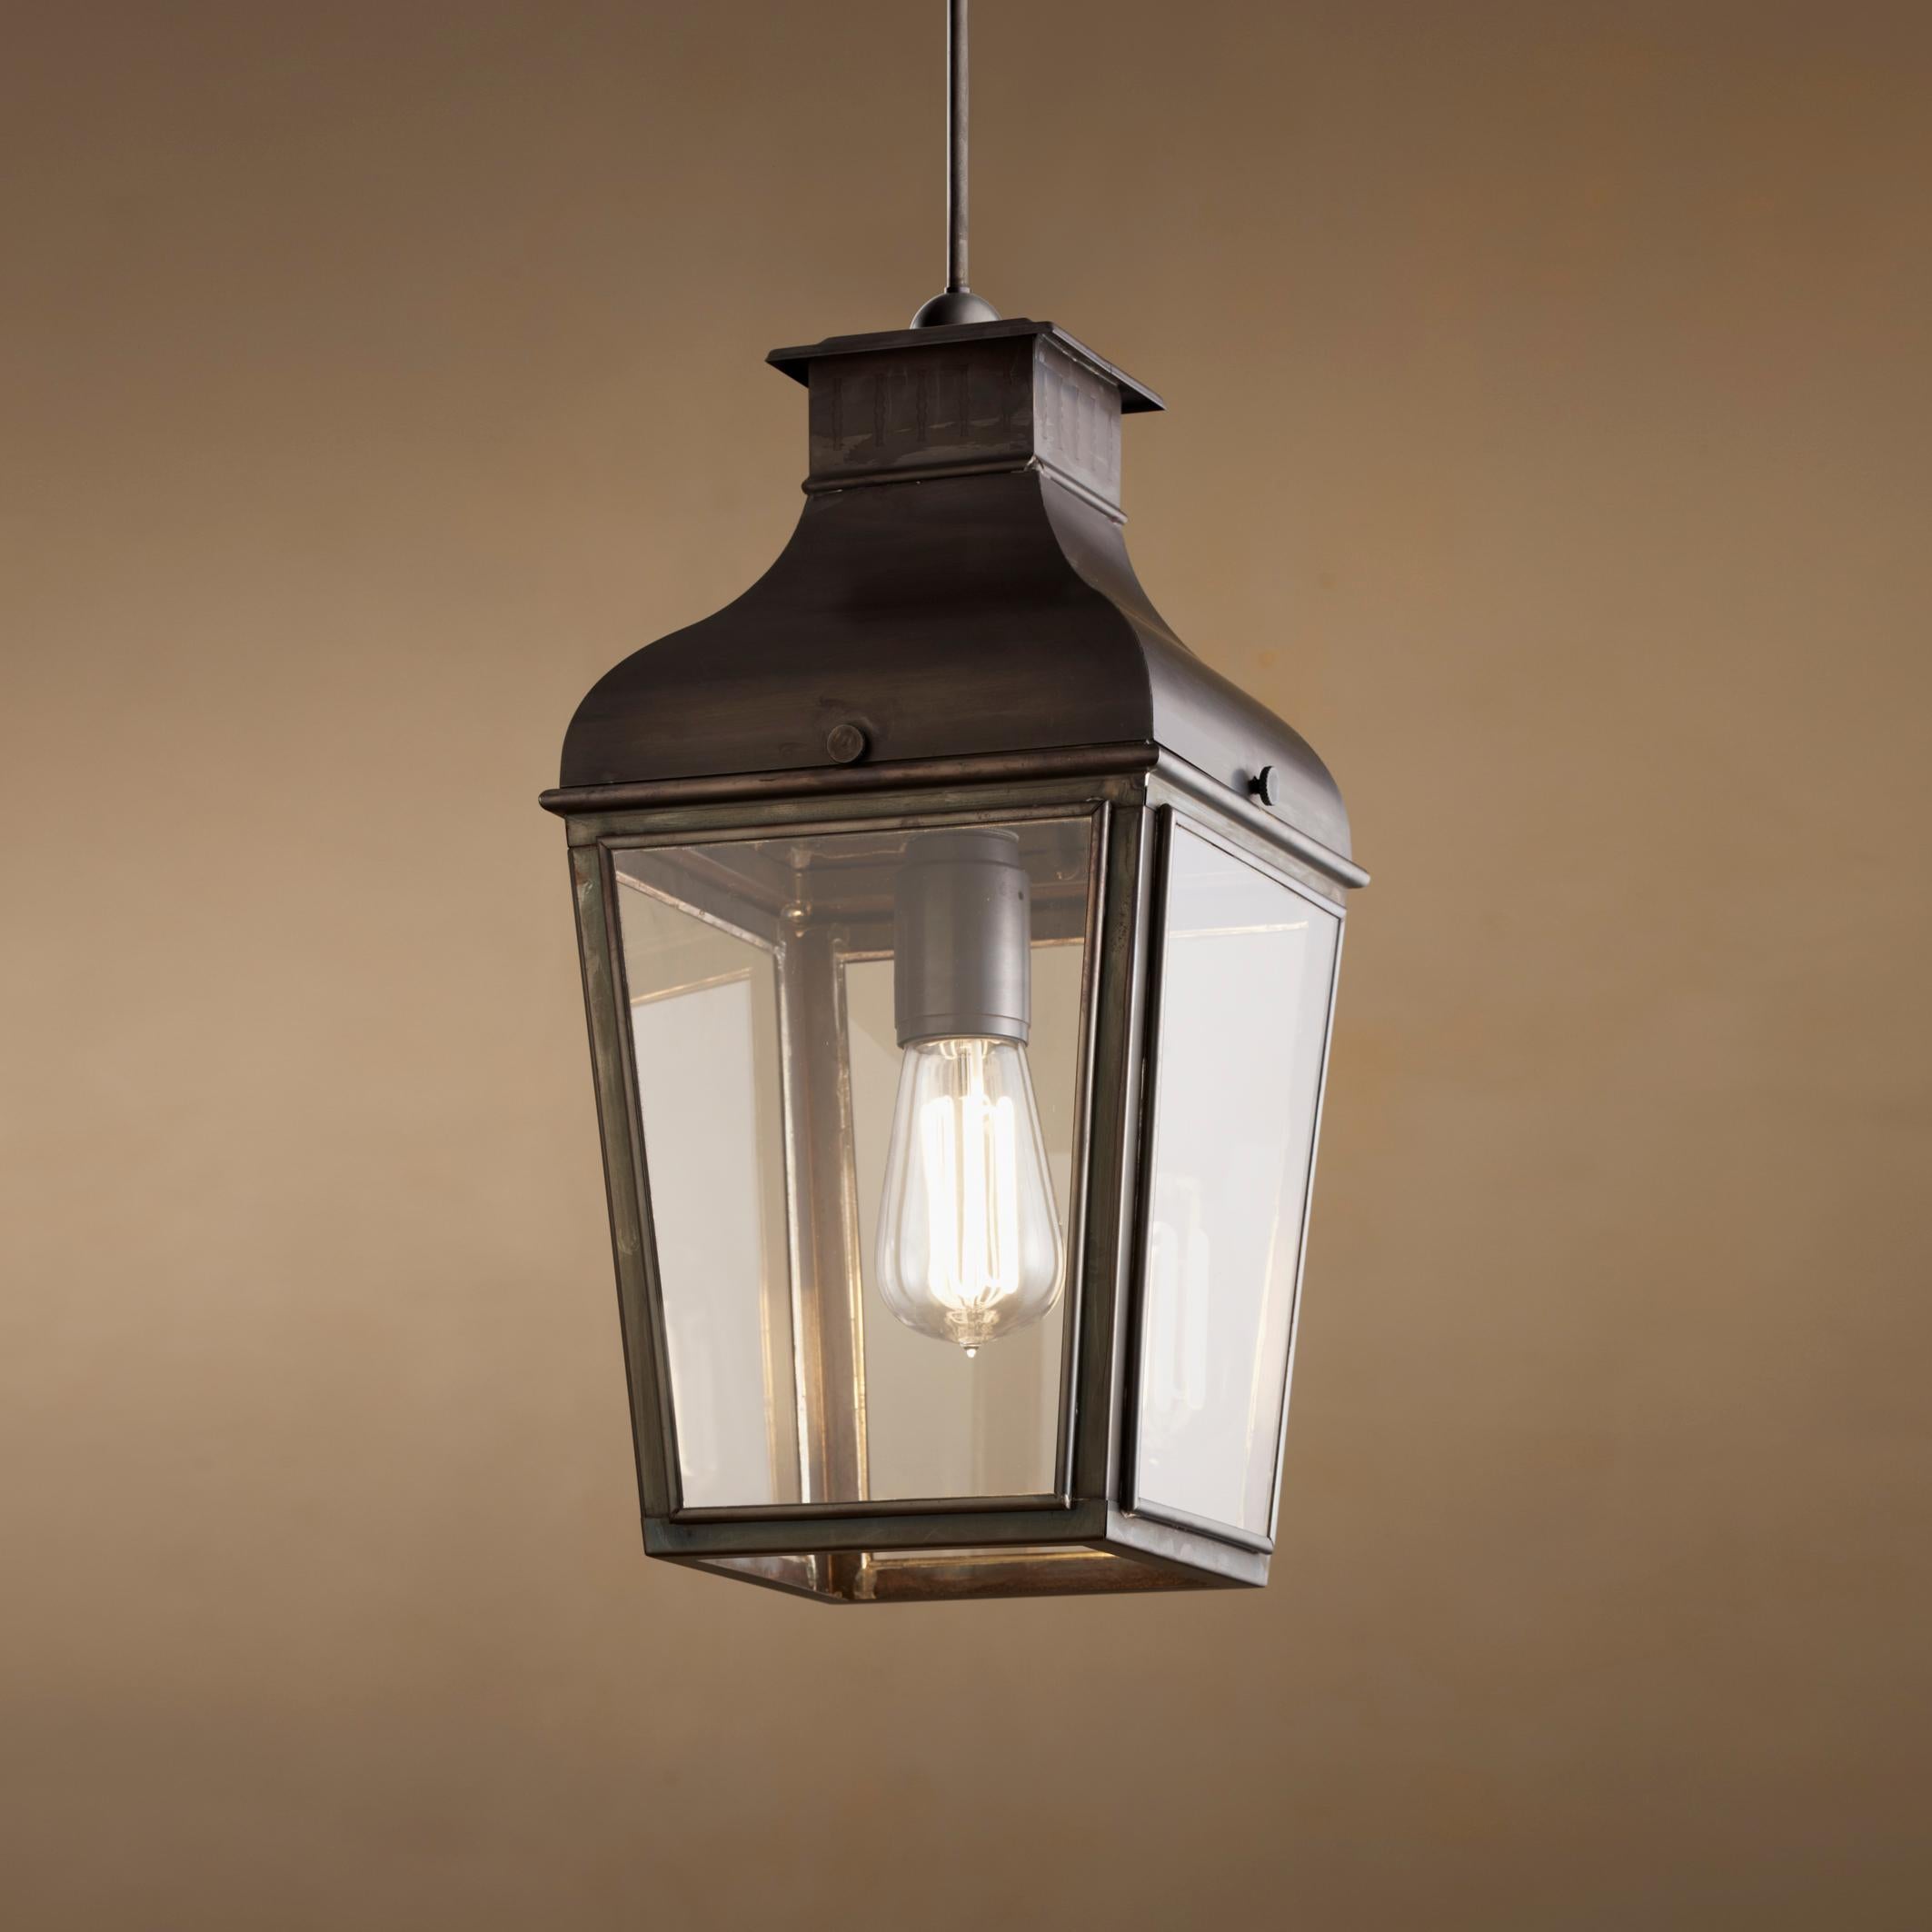 Hanging light with pagoda structure in dark bronze with outside fitted clear glass. For indoor and outdoor use (IP43).

Caret squirrel cage lamp 230V E27 7,7W 2300K. Main power 230V 50Hz.